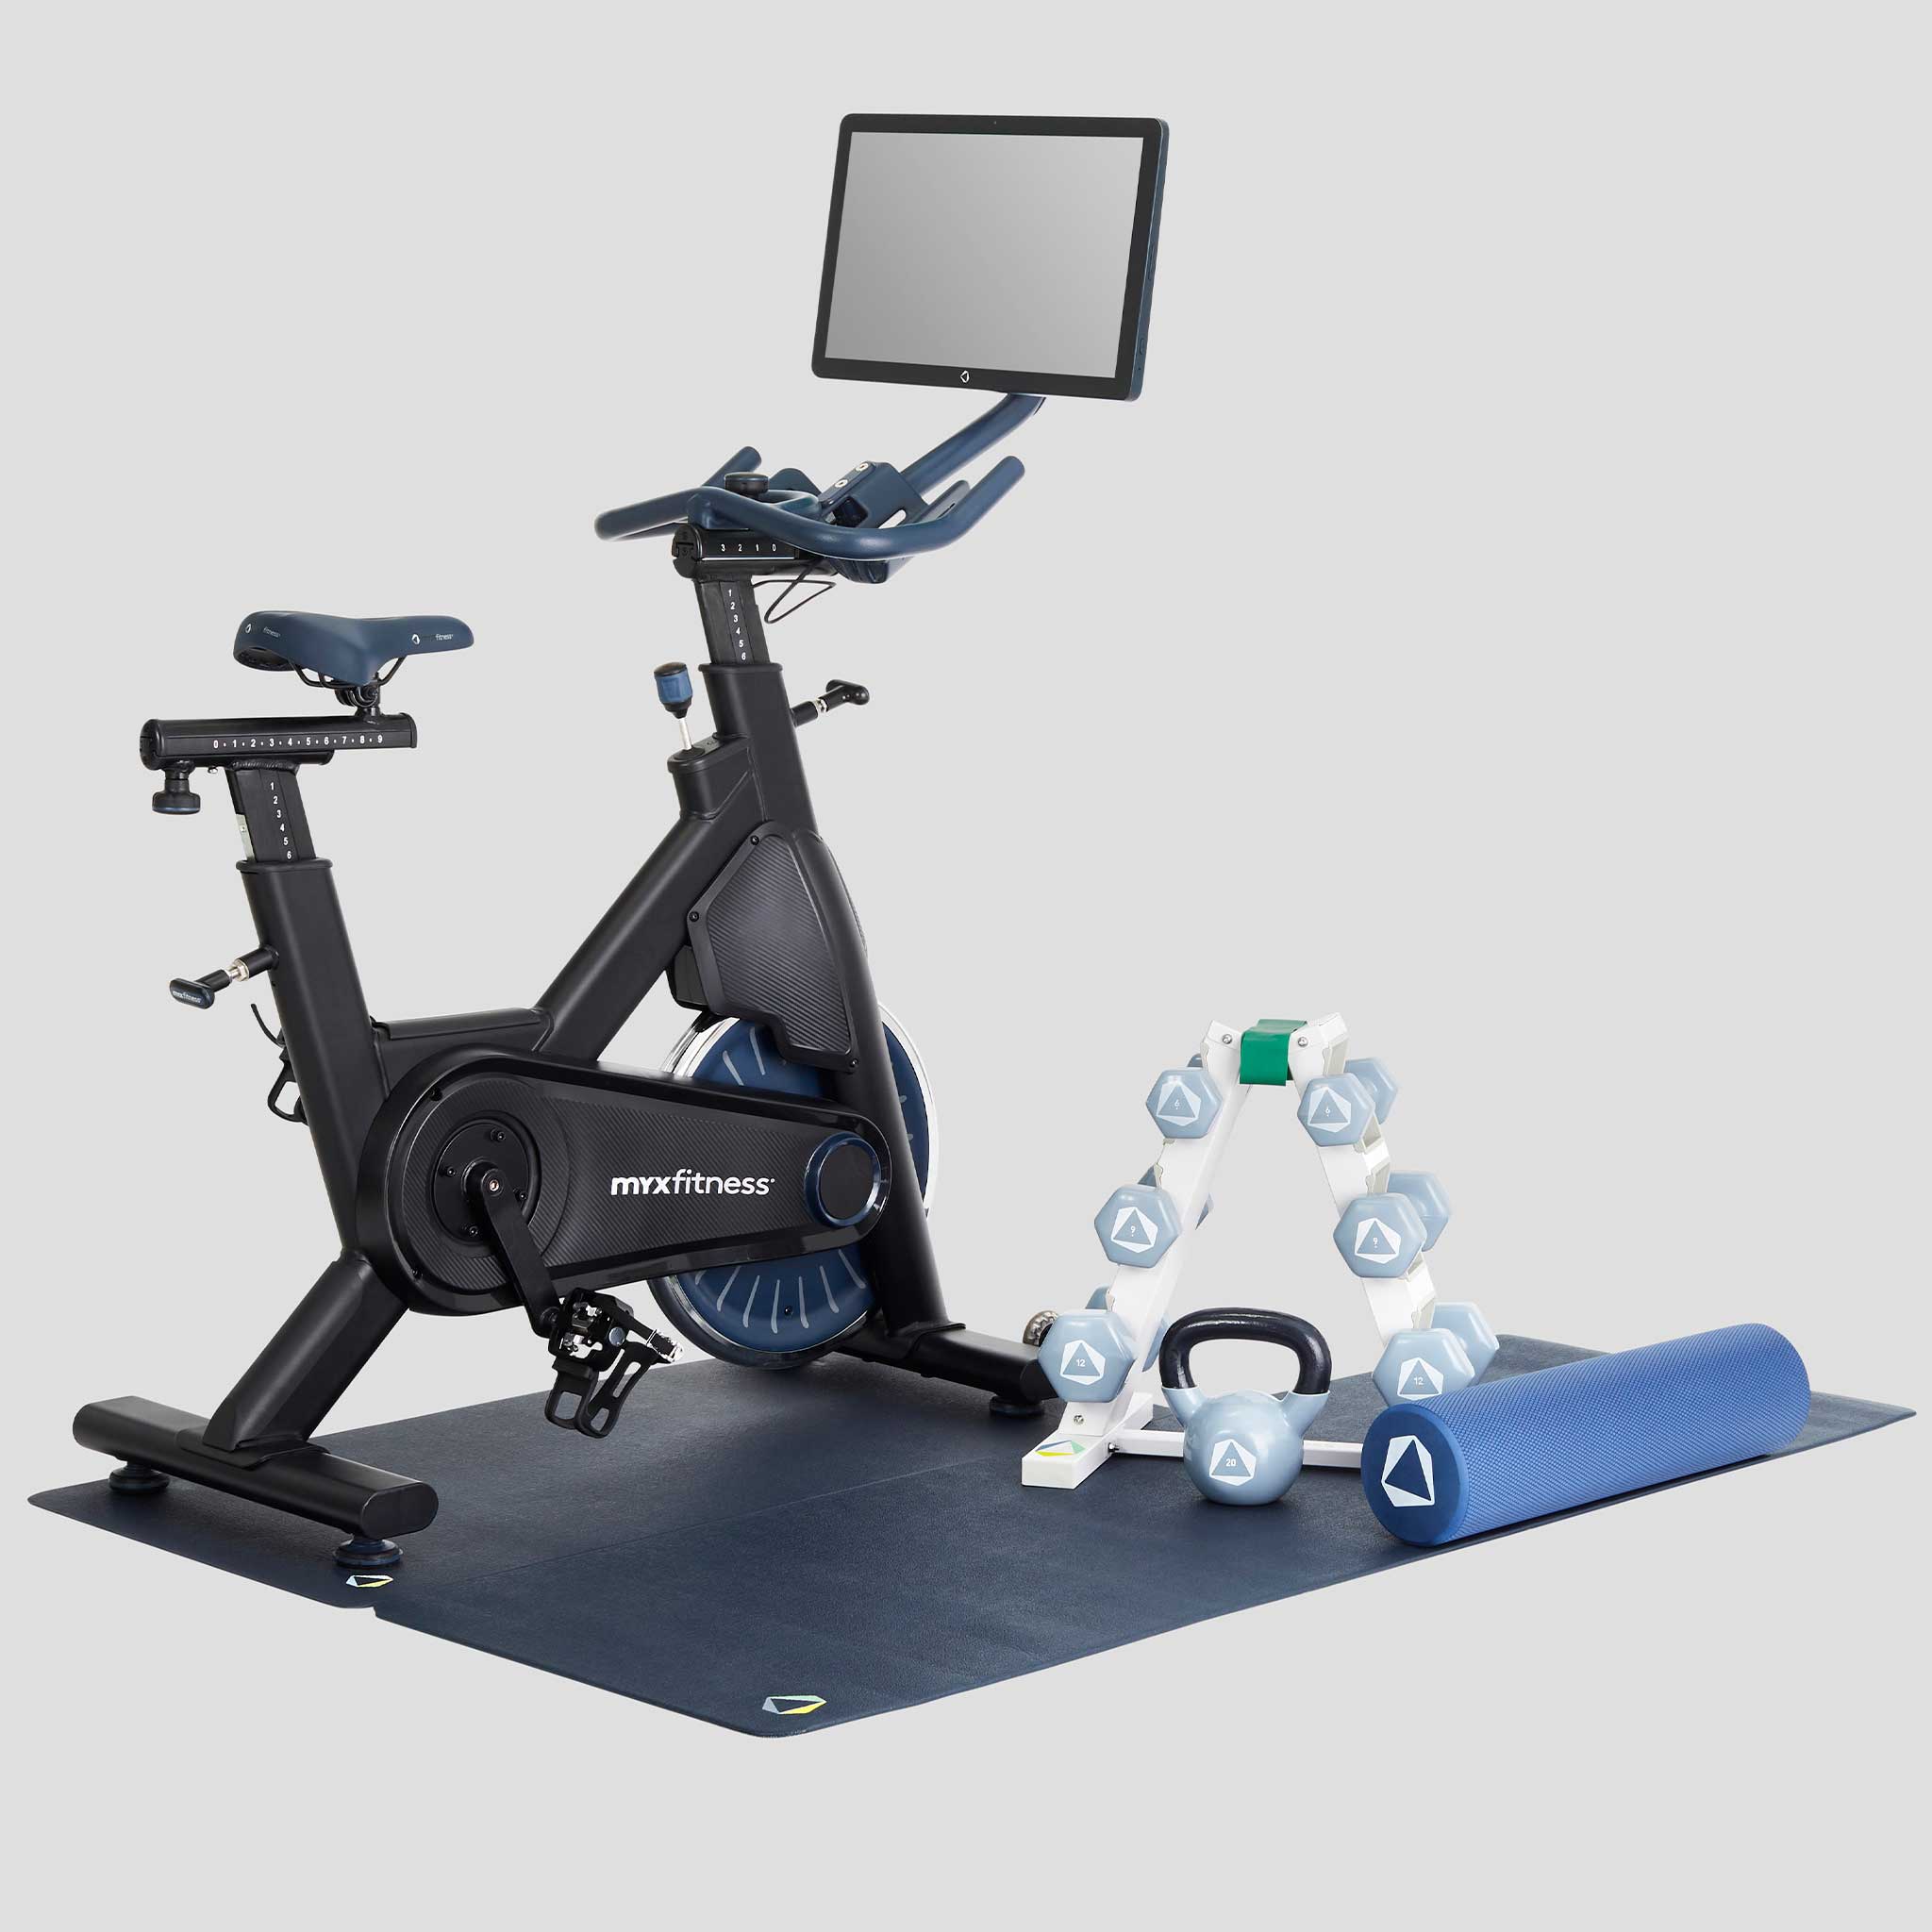 The MYX II Plus Home Studio in Charcoal black with weight rack, foam roller, spri stretch band, kettlebell and floor mats